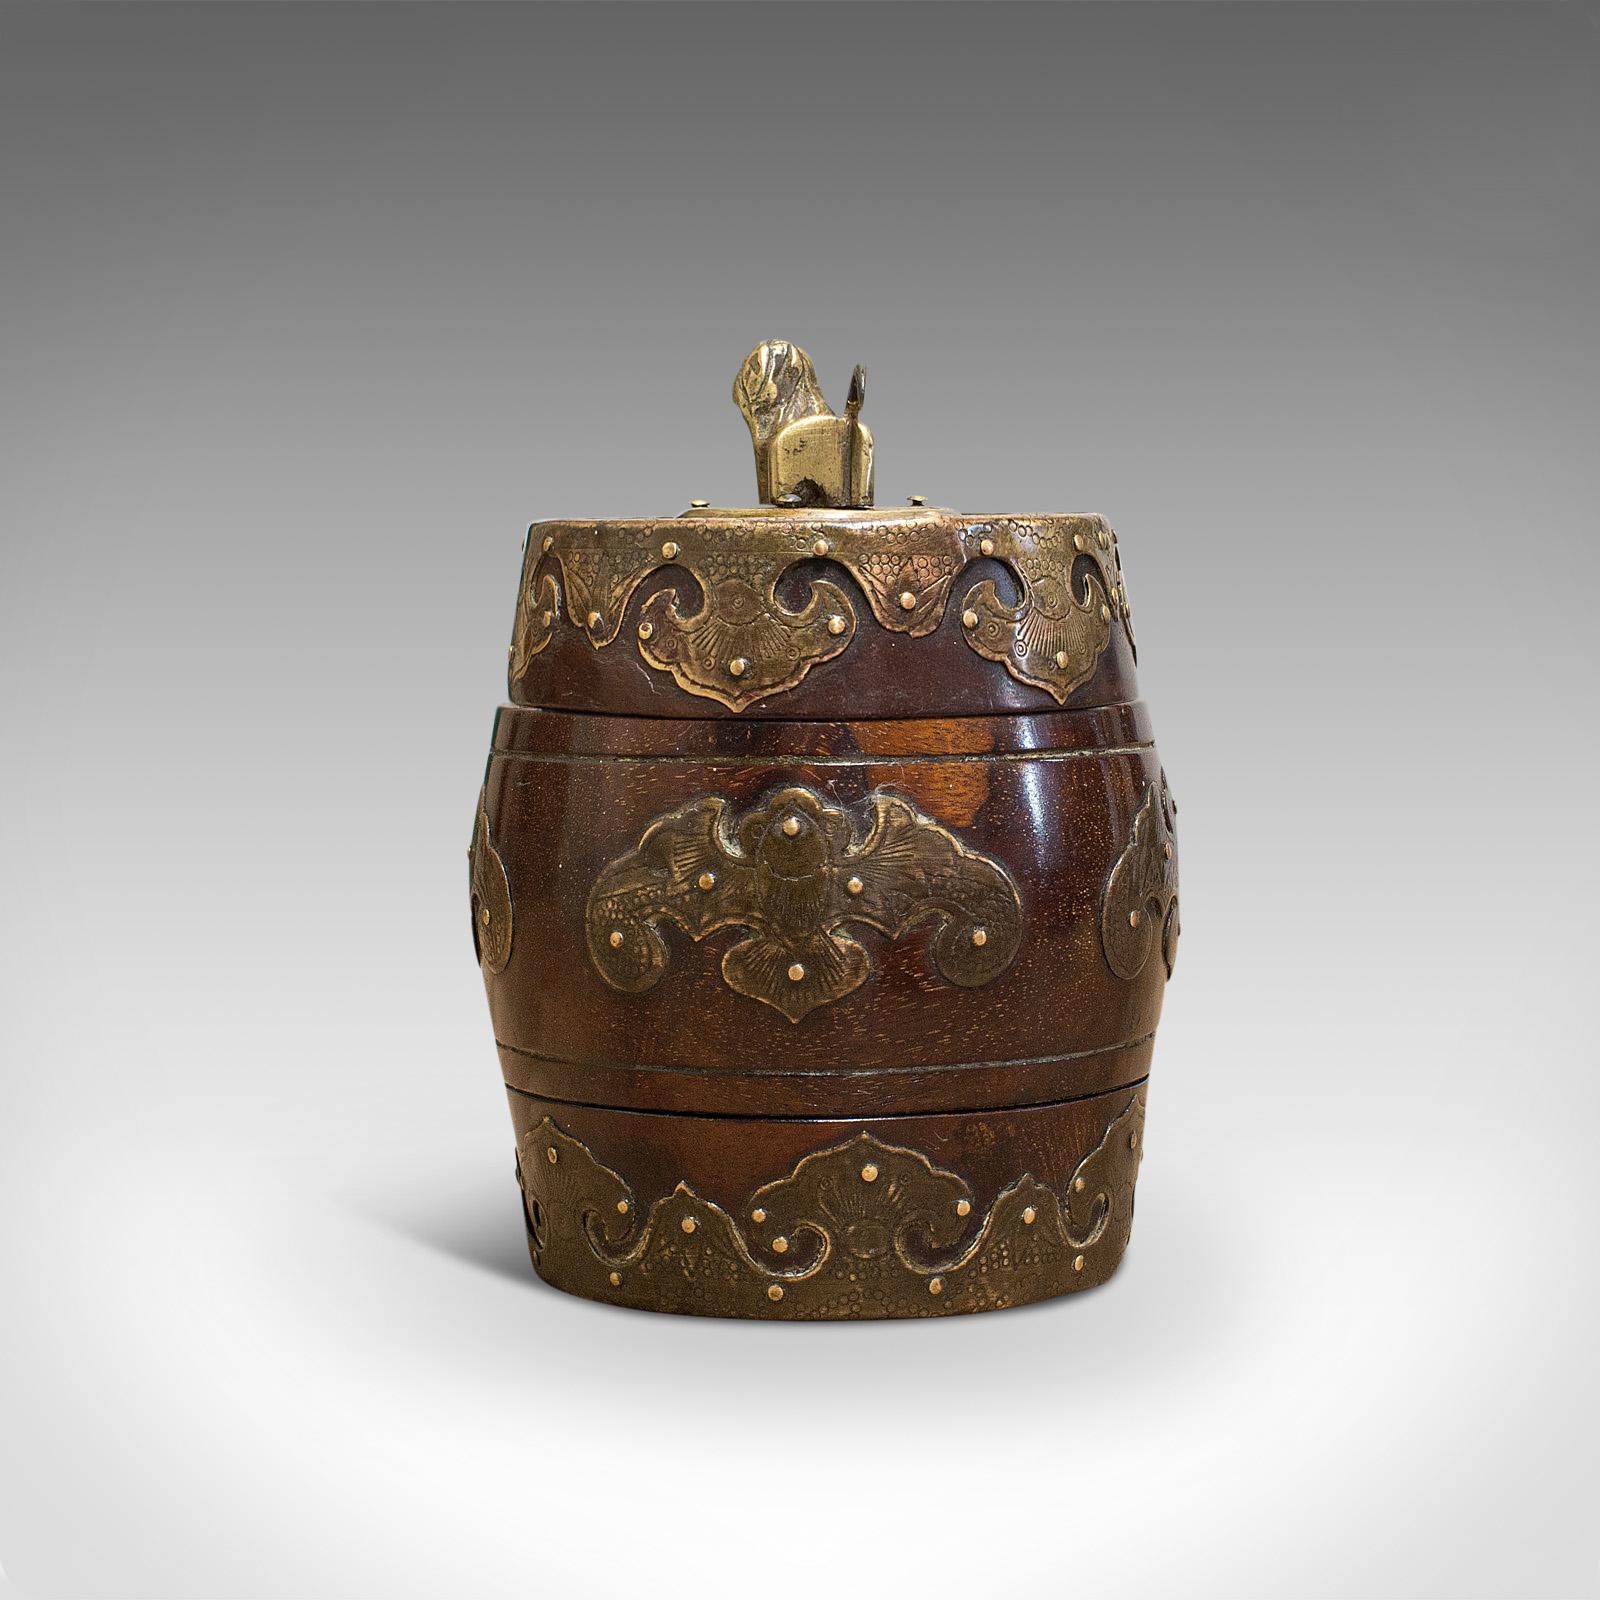 19th Century Small Antique Spice Jar, Chinese, Mahogany, Brass, Decorative Pot, Victorian For Sale